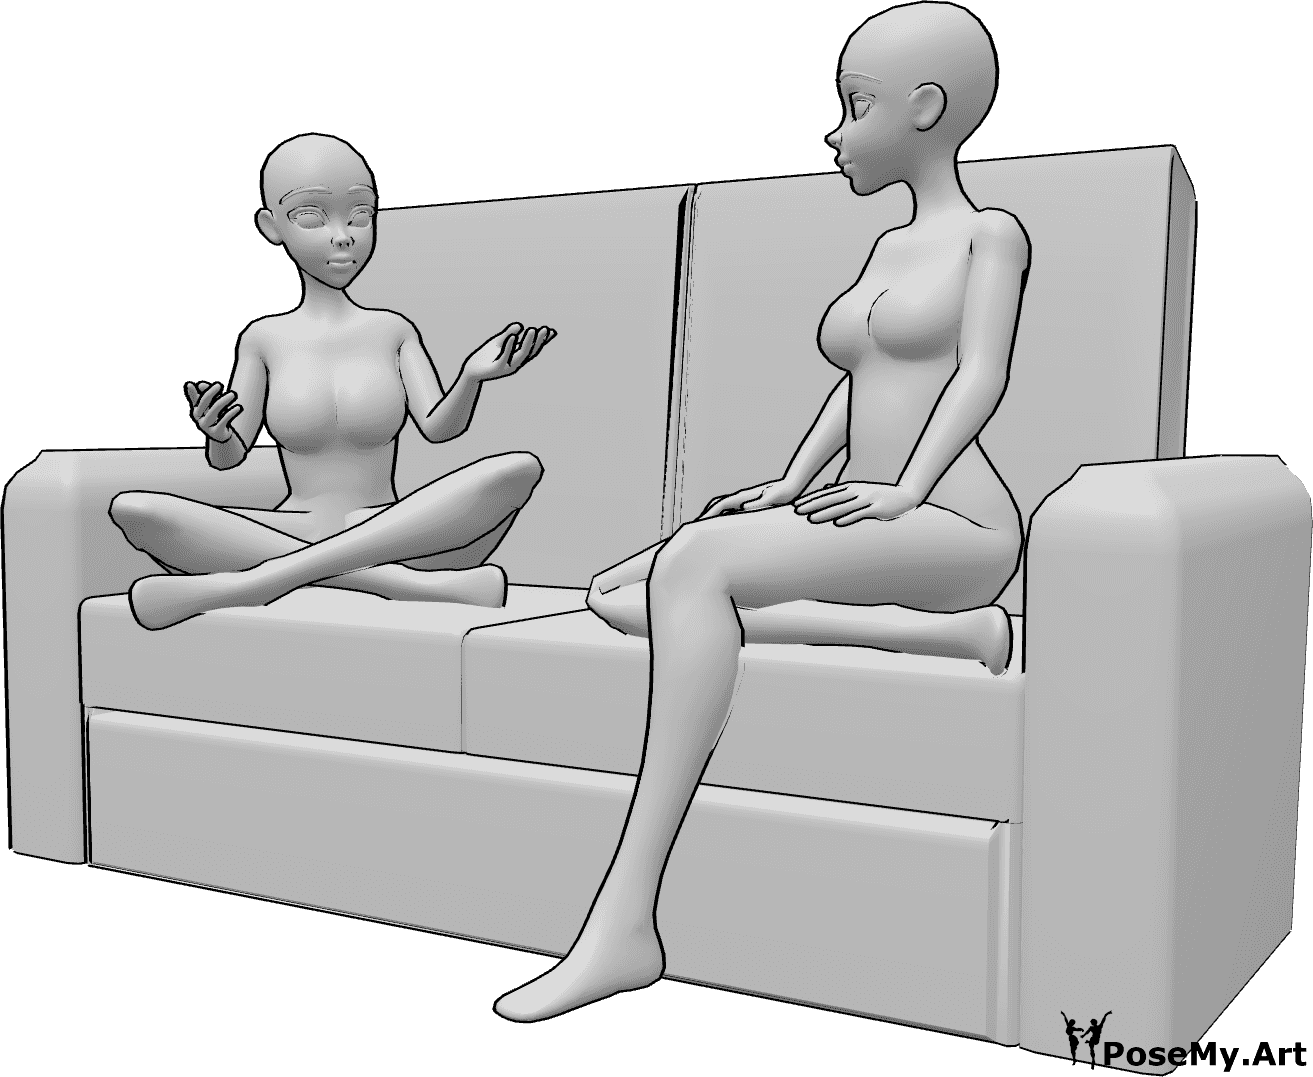 Pose Reference- Anime sitting talking pose - Two anime females are sitting on the couch and talking, looking at each other